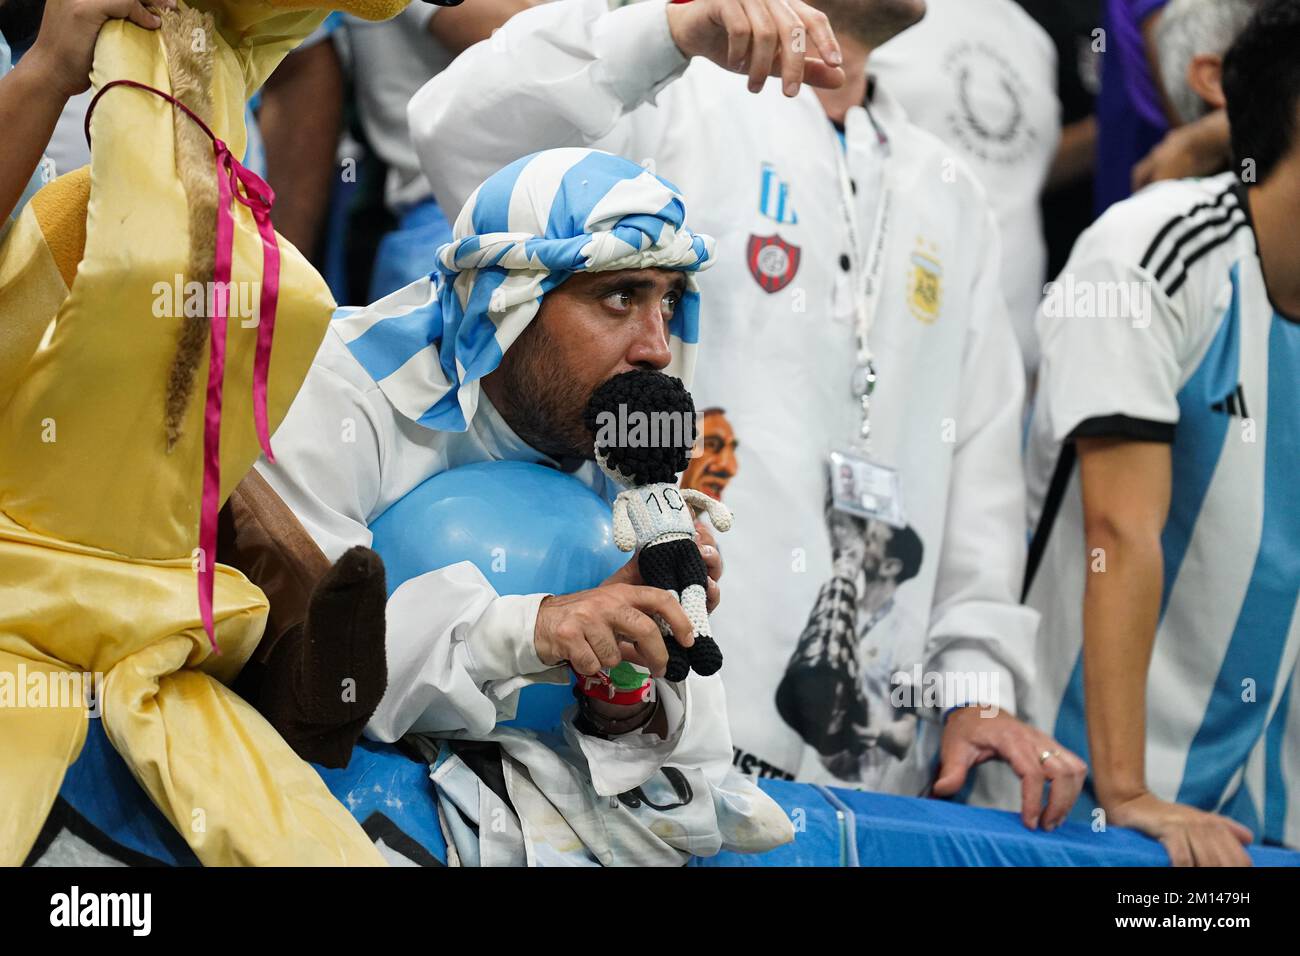 LUSAIL, QATAR - DECEMBER 9: Argentina supporter gesticules during the FIFA World Cup Qatar 2022 quarter final match between Netherlands and Argentina at Lusail Stadium on December 09, 2022 in Lusail, Qatar. (Photo by FlorenciaTan Jun/Pximages) Credit: Px Images/Alamy Live News Stock Photo